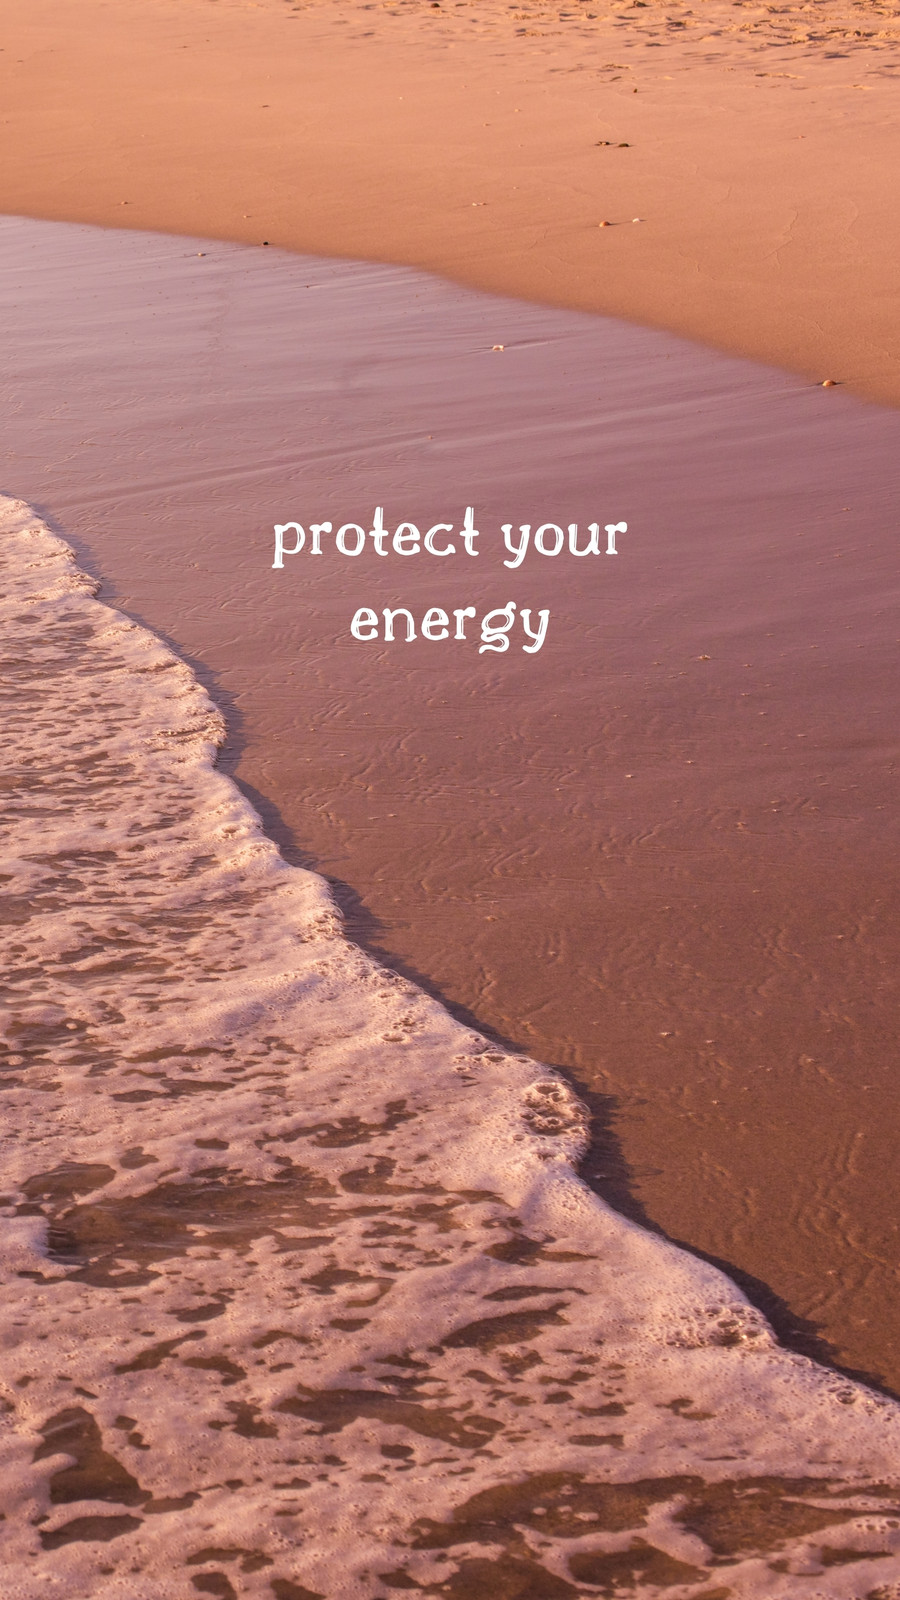 Protect your Energy by Typeezy on Dribbble